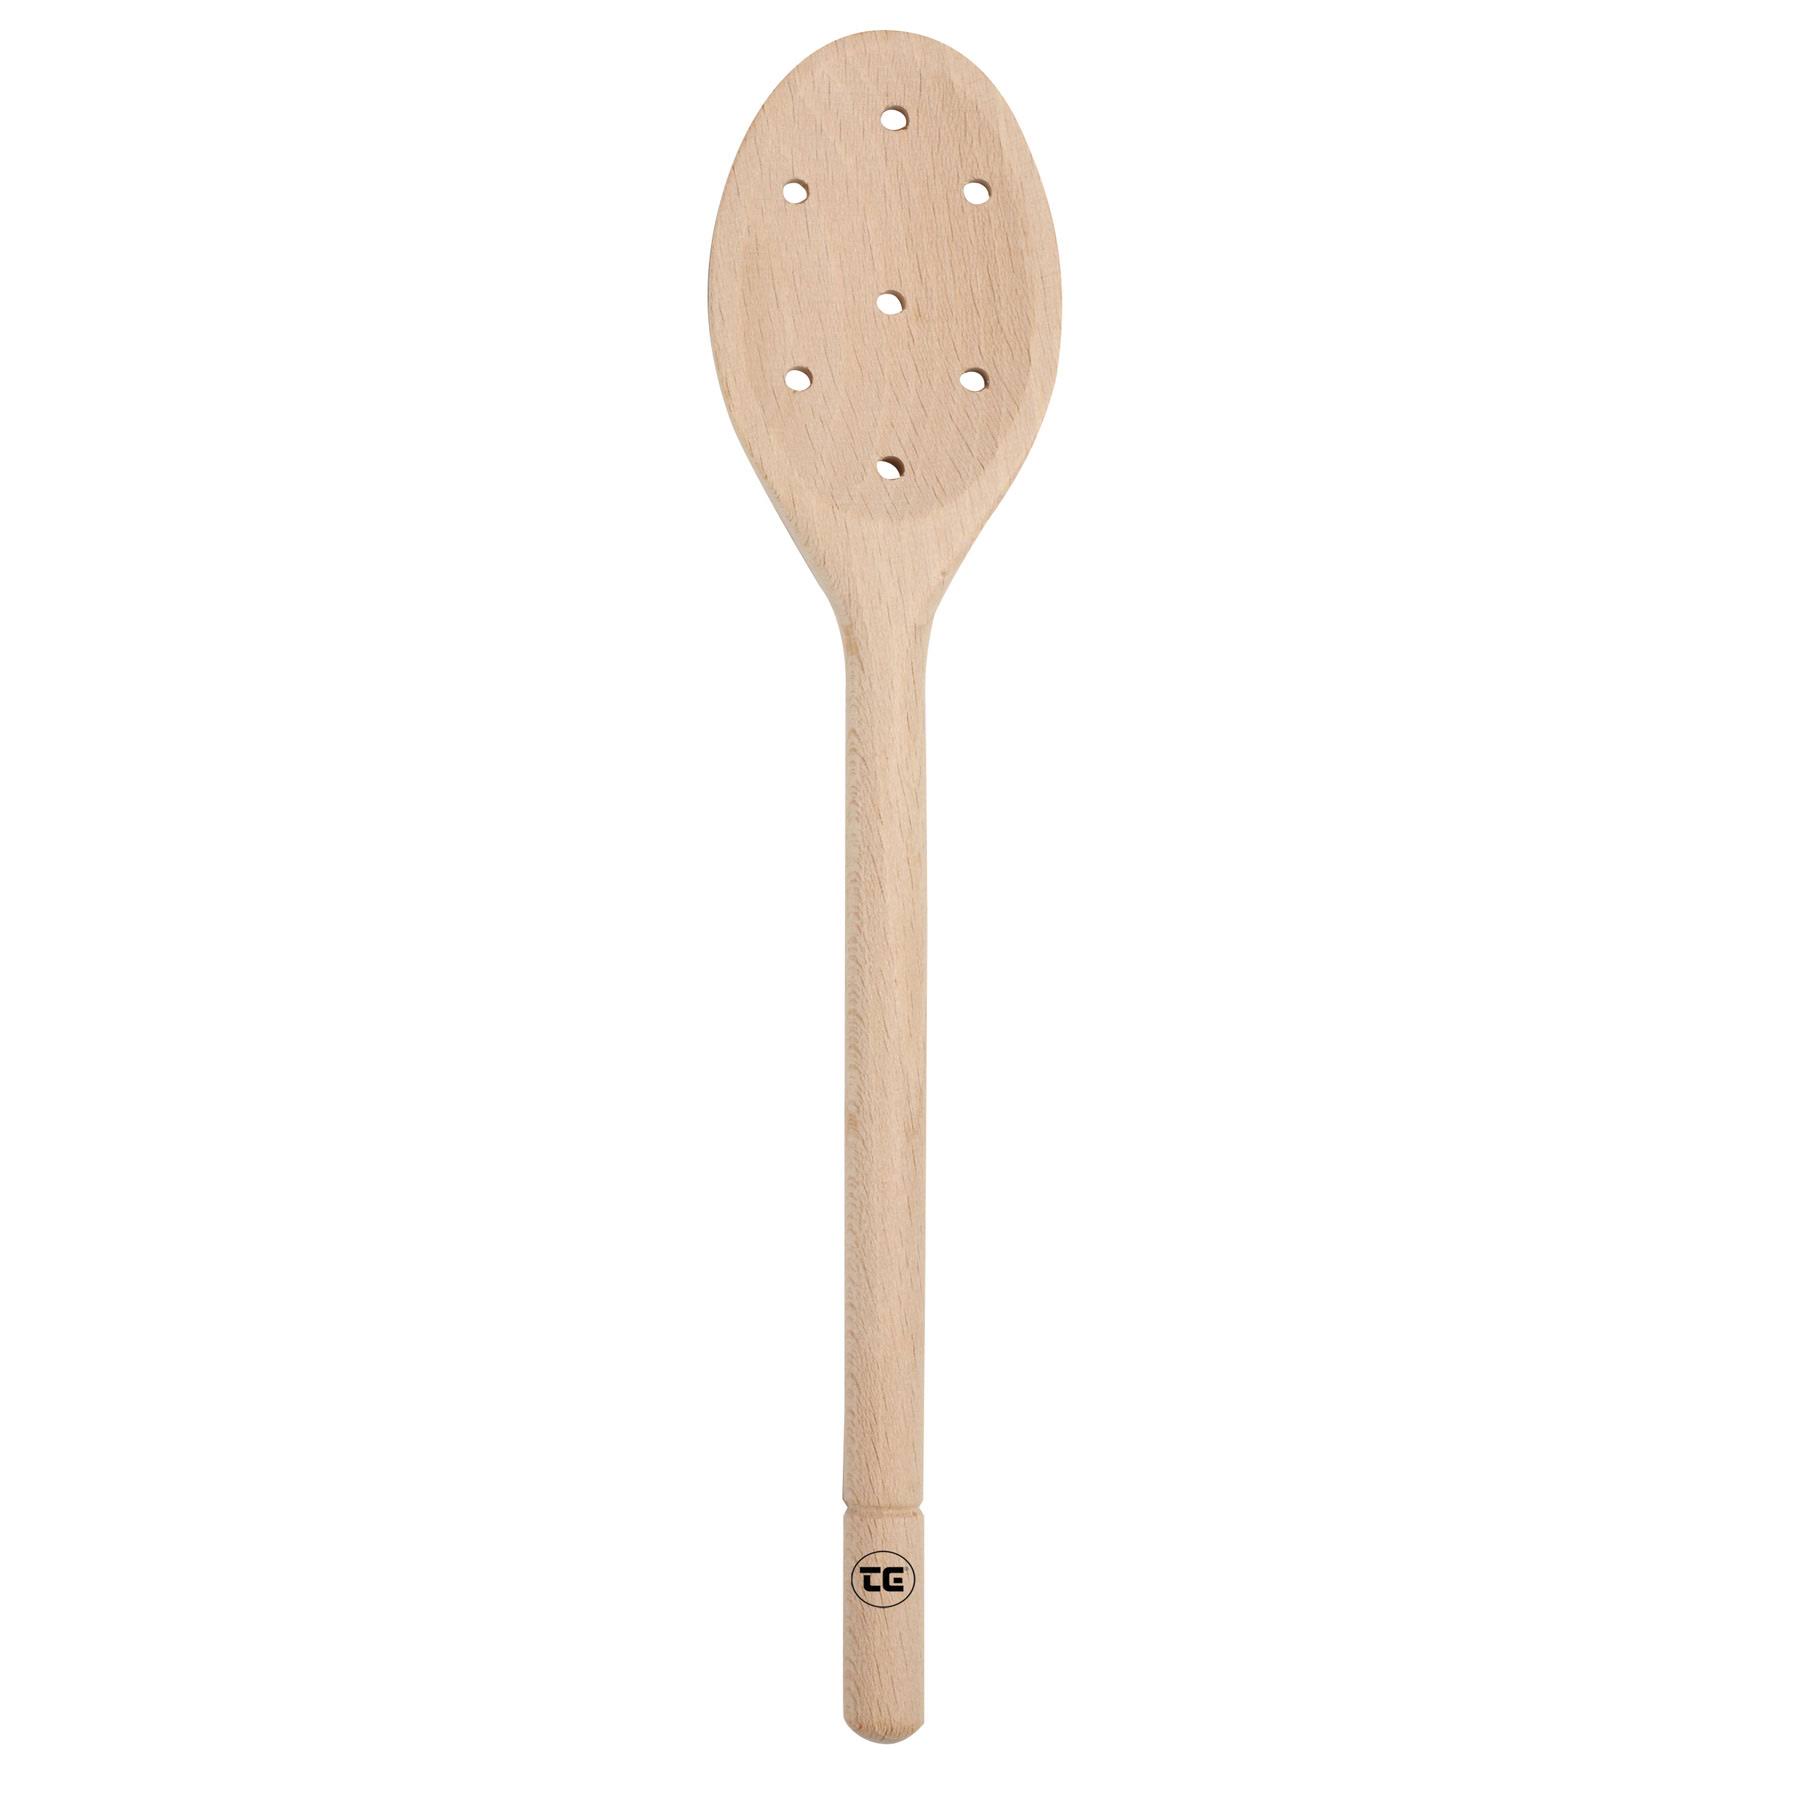 T&G Woodware Wooden Spoon with Holes, 30cm, Natural